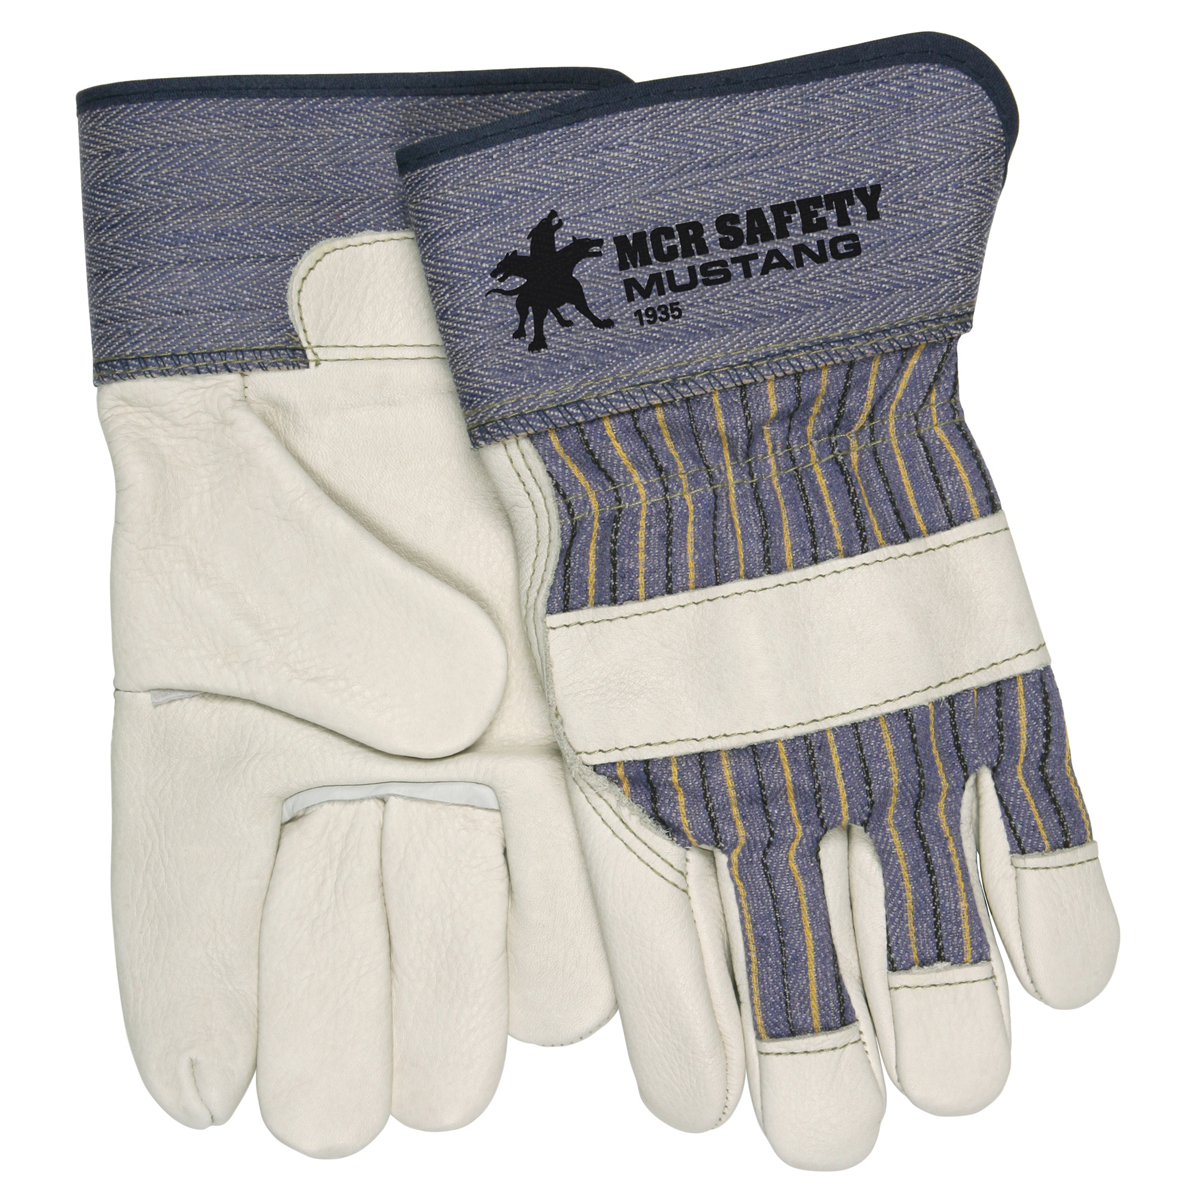 MCR Safety Medium Blue, Yellow And Black Premium Grain Cowhide Palm Gloves With Fabric Back And Rubberized Safety Cuff